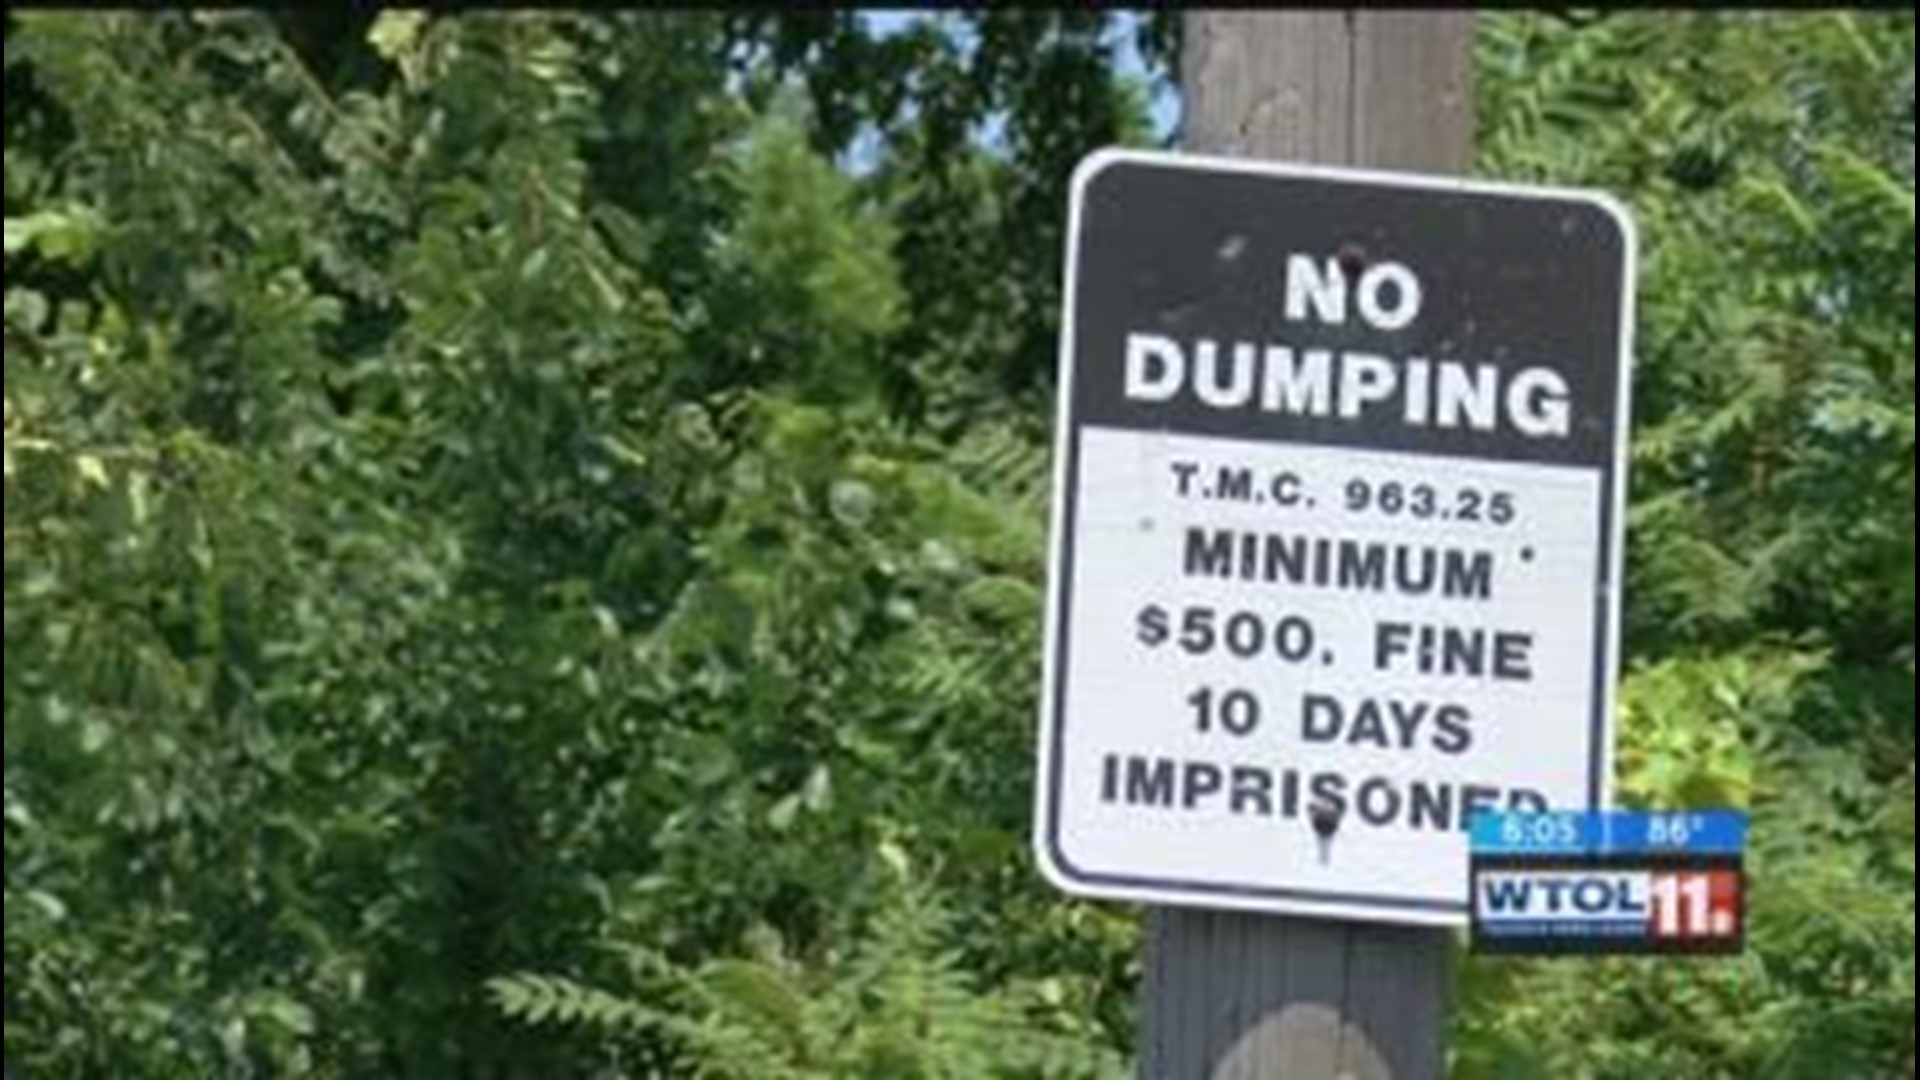 City says they will take action against illegal dumping in east Toledo